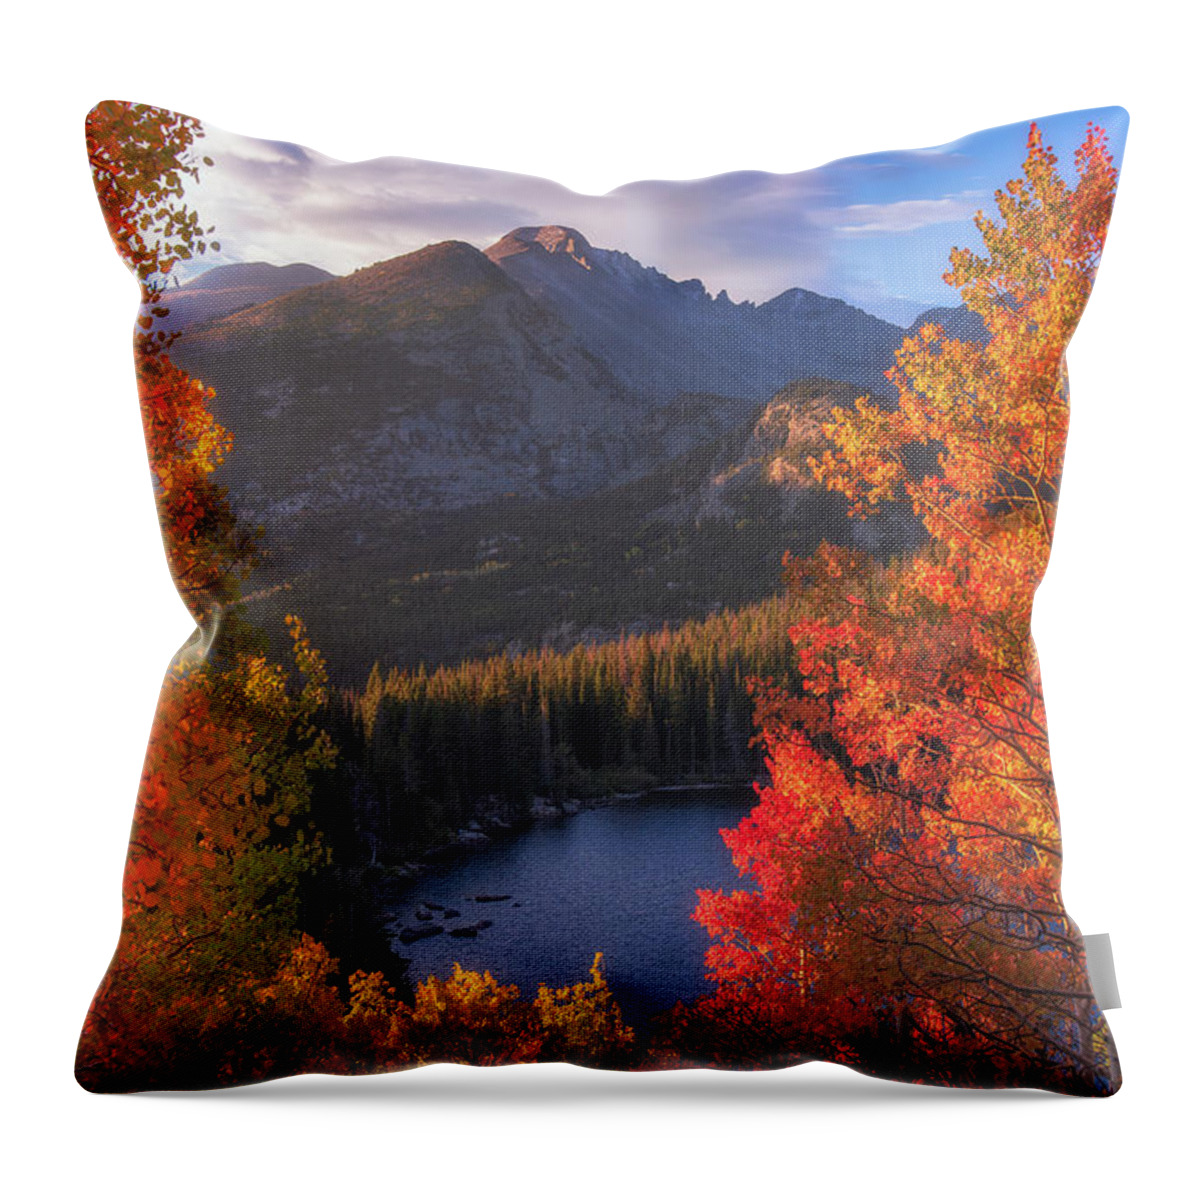 Fall Throw Pillow featuring the photograph Rocky Mountain Autumn by Darren White